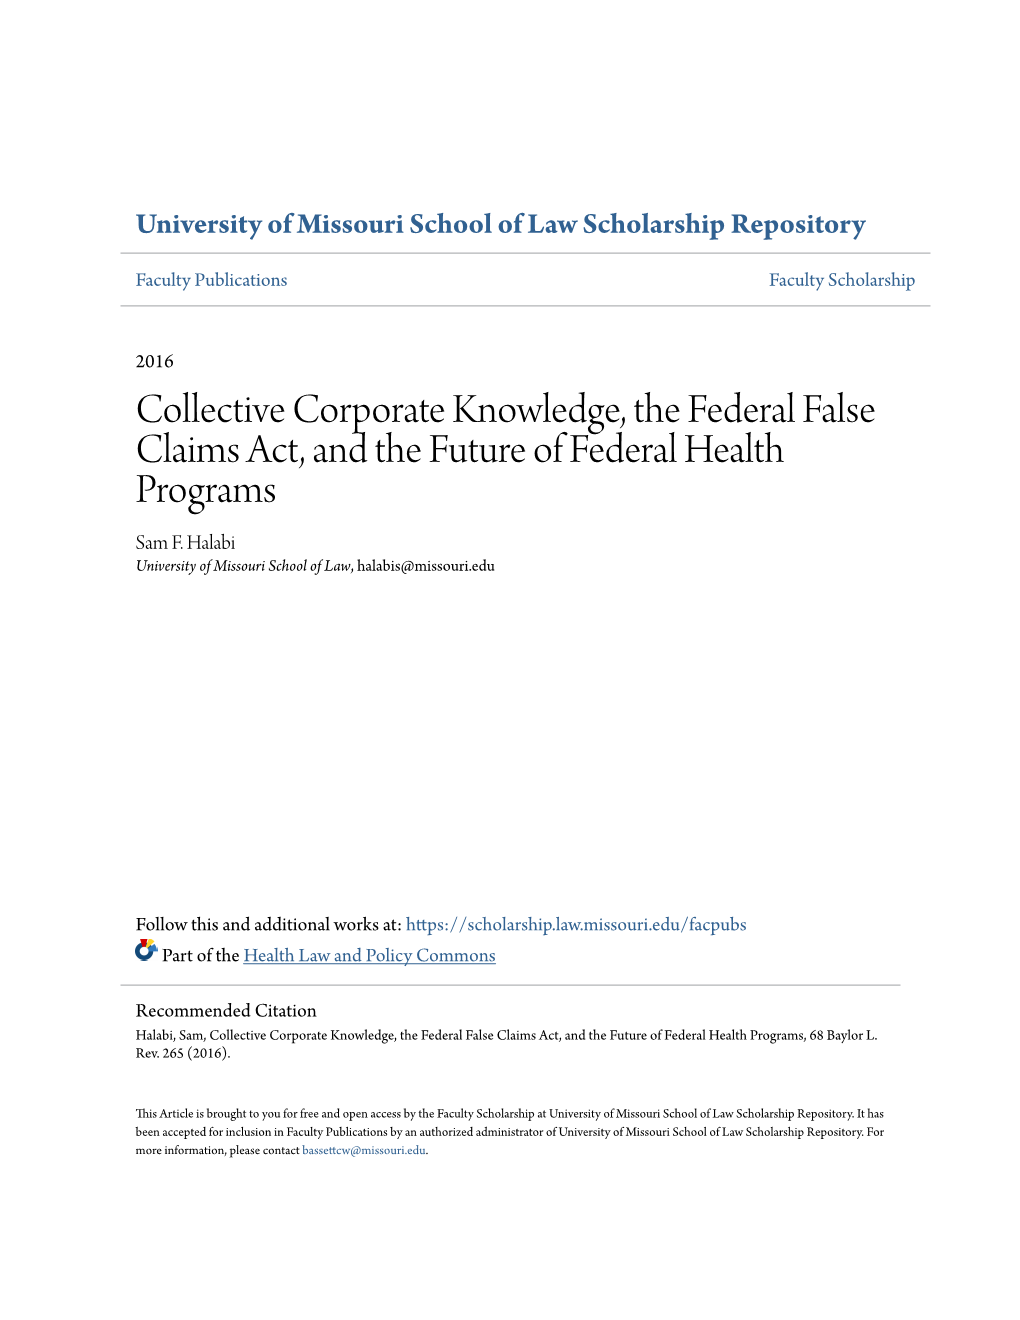 Collective Corporate Knowledge, the Federal False Claims Act, and the Future of Federal Health Programs Sam F